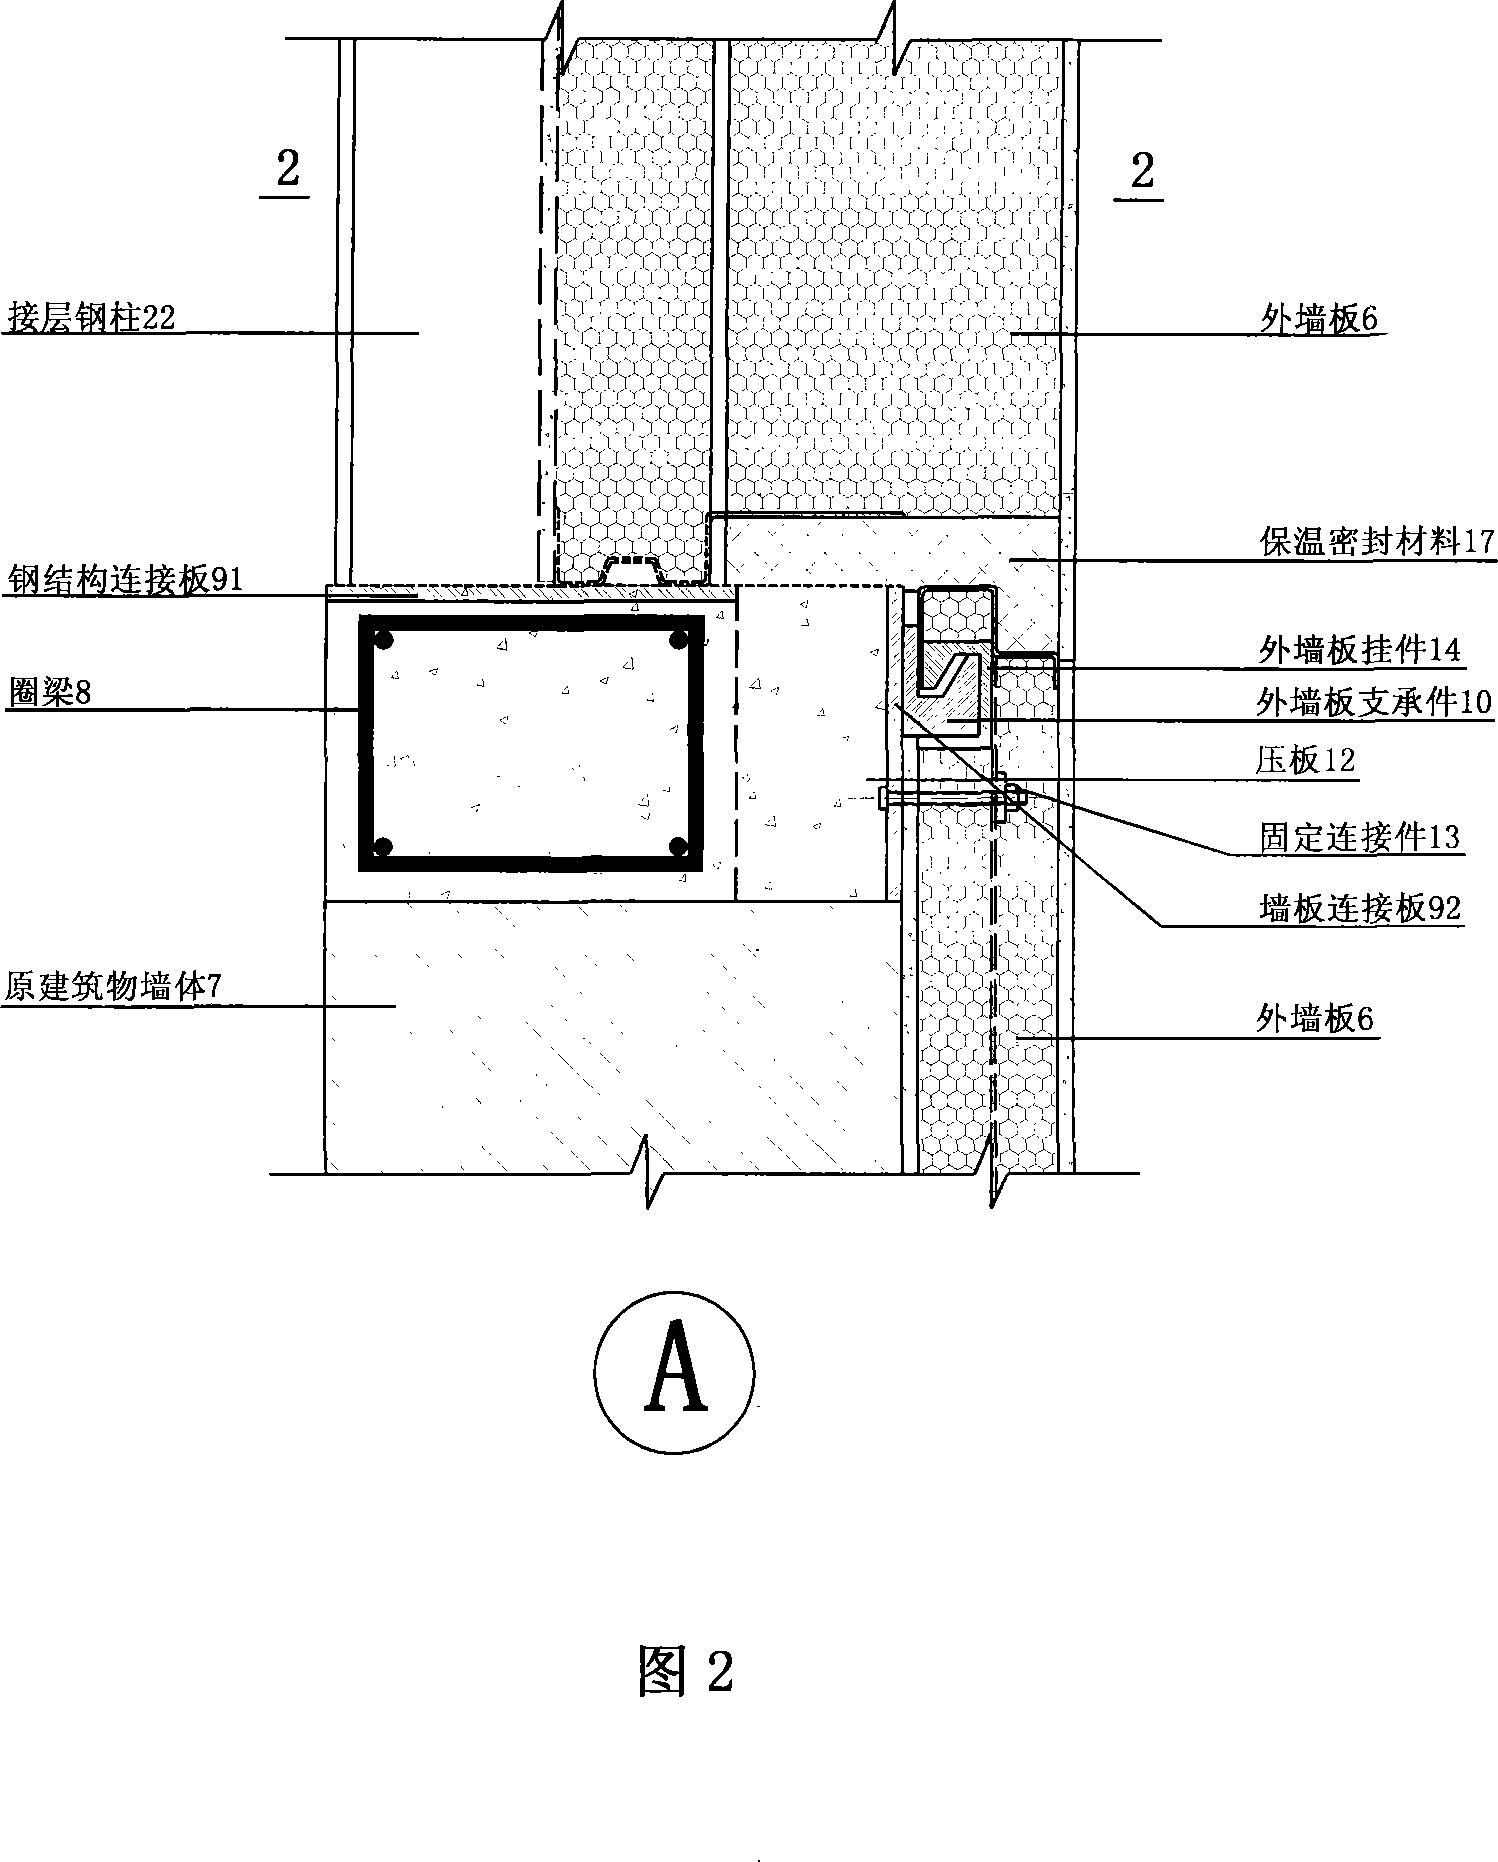 Assembly building method for energy-saving reconstruction of existing building